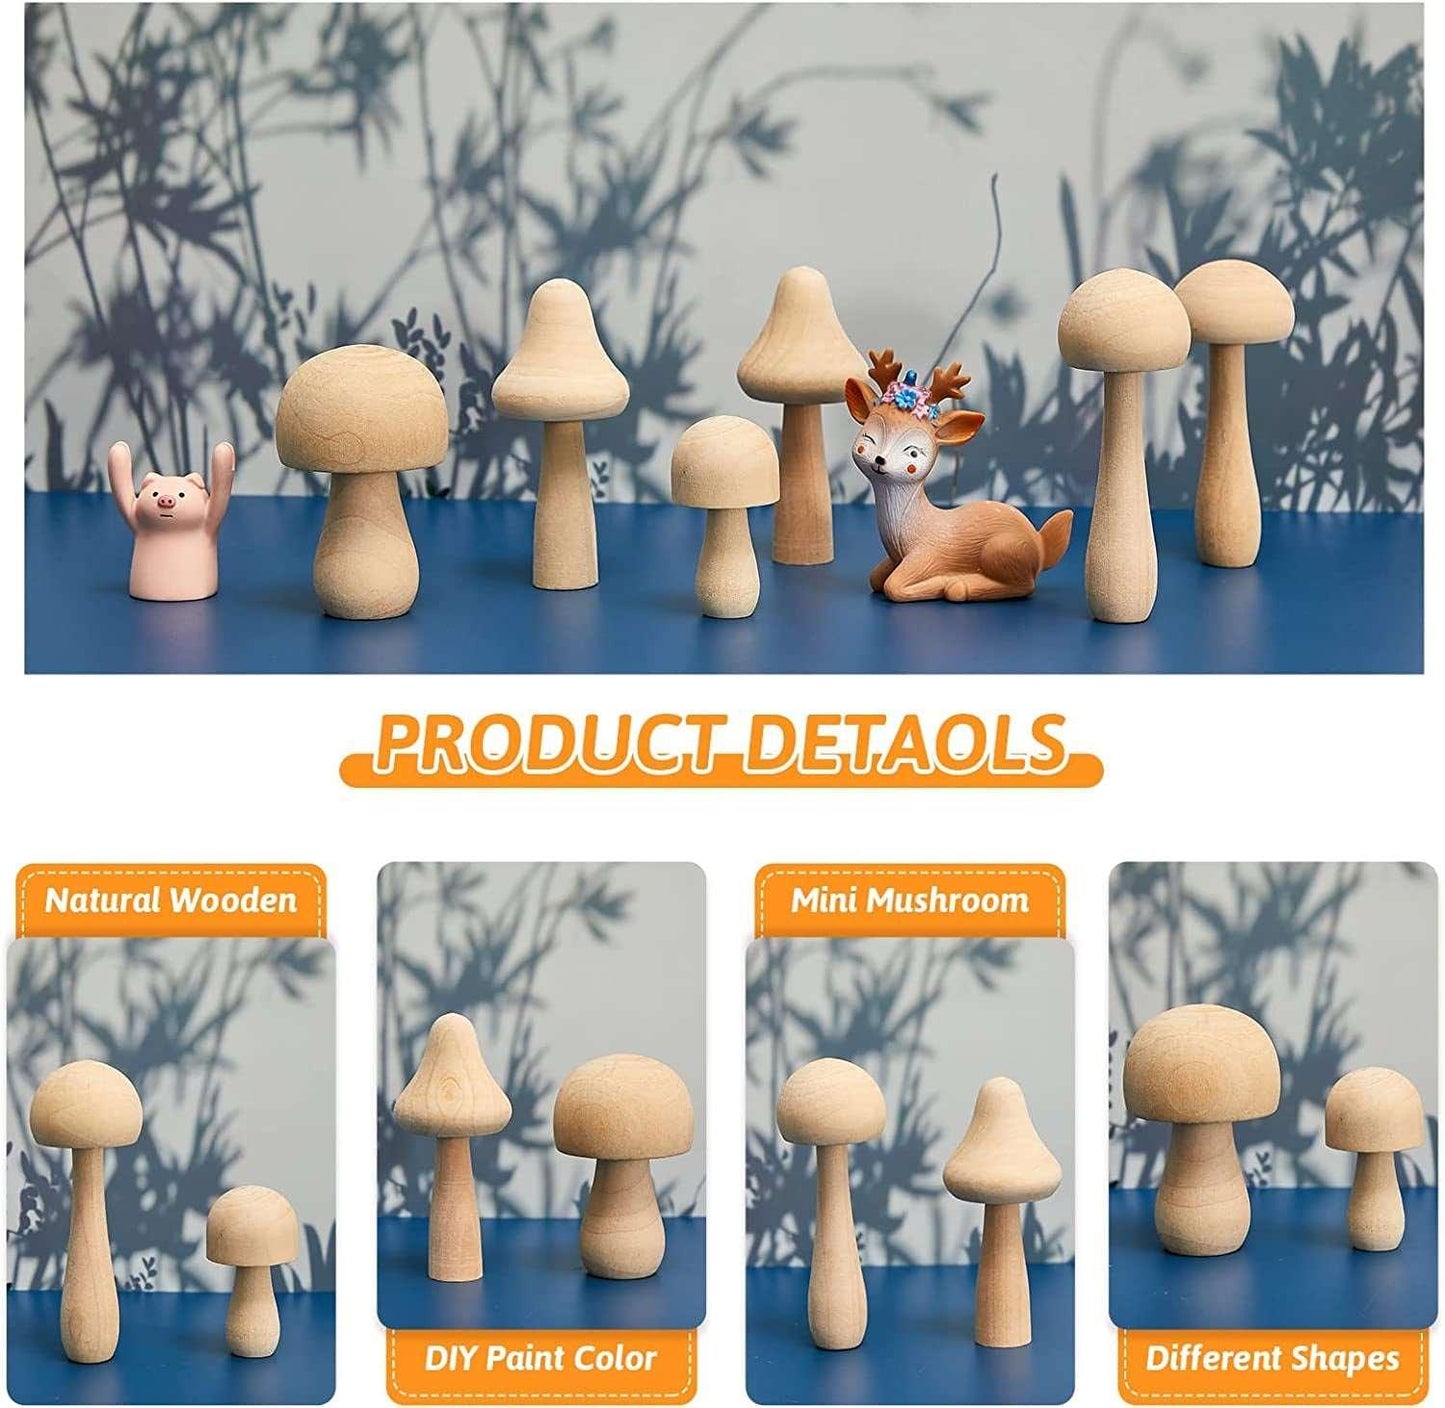 15 Unfinished Wooden Mushroom Natural Unpainted for Arts and Crafts Projects Decoration DIY Paint Color - WoodArtSupply